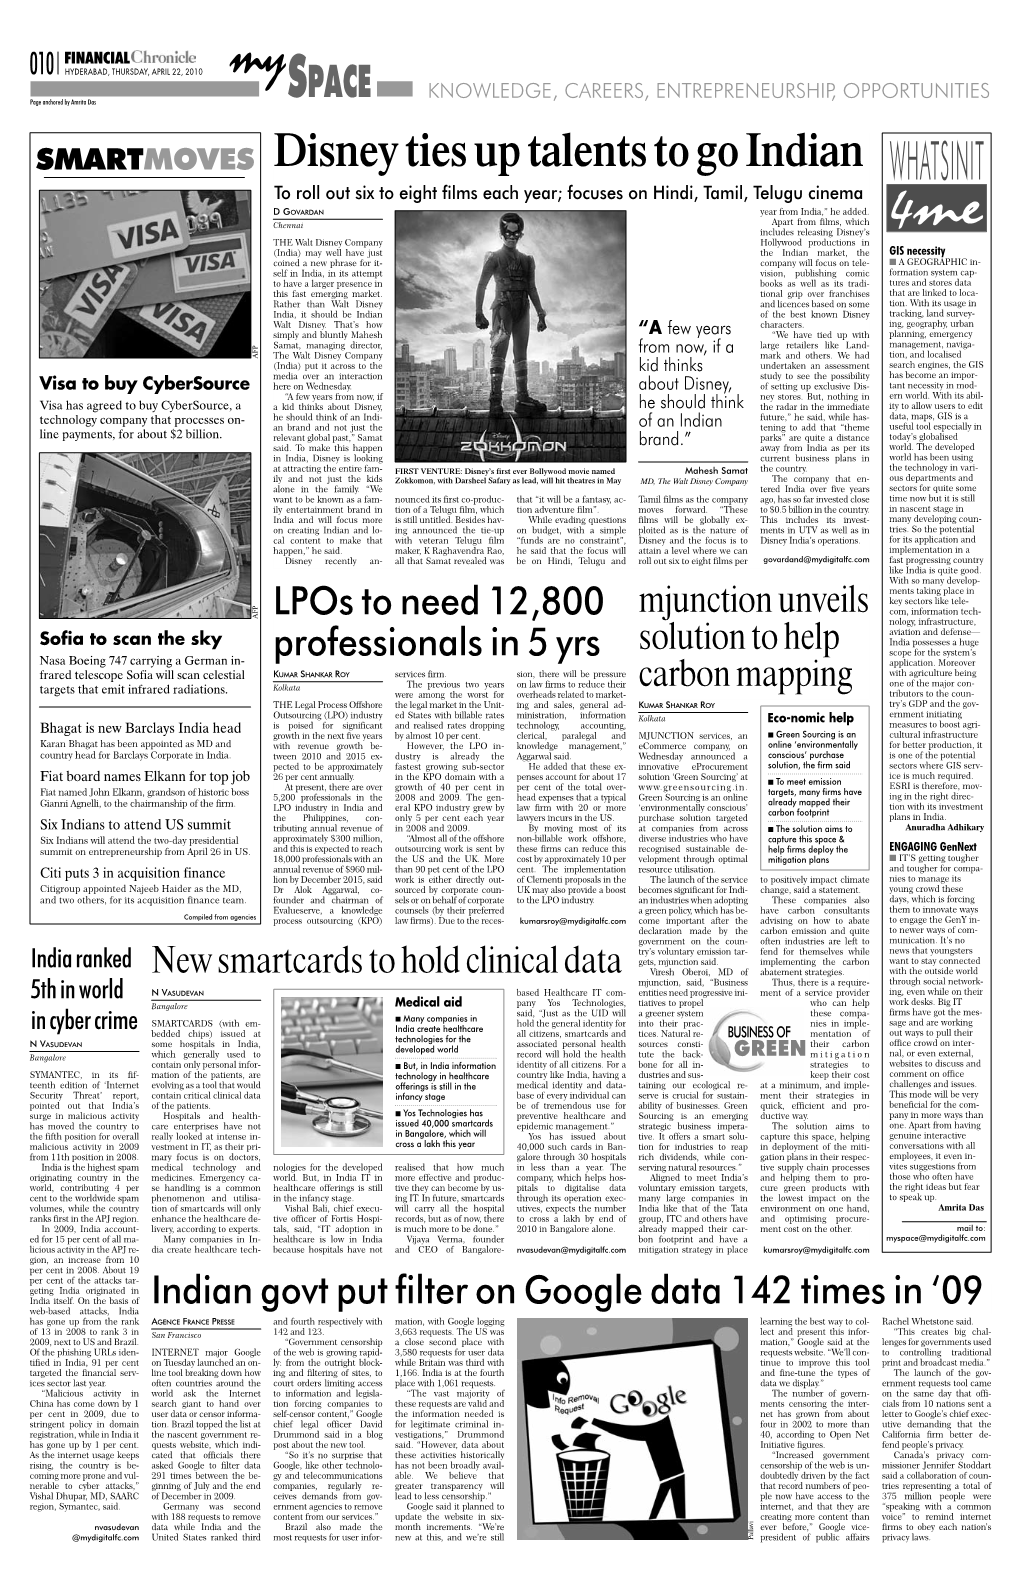 My 010 HYDERABAD, THURSDAY, APRIL 22, 2010 KNOWLEDGE, CAREERS, ENTREPRENEURSHIP, OPPORTUNITIES Page Anchored by Amrita Das SPACE